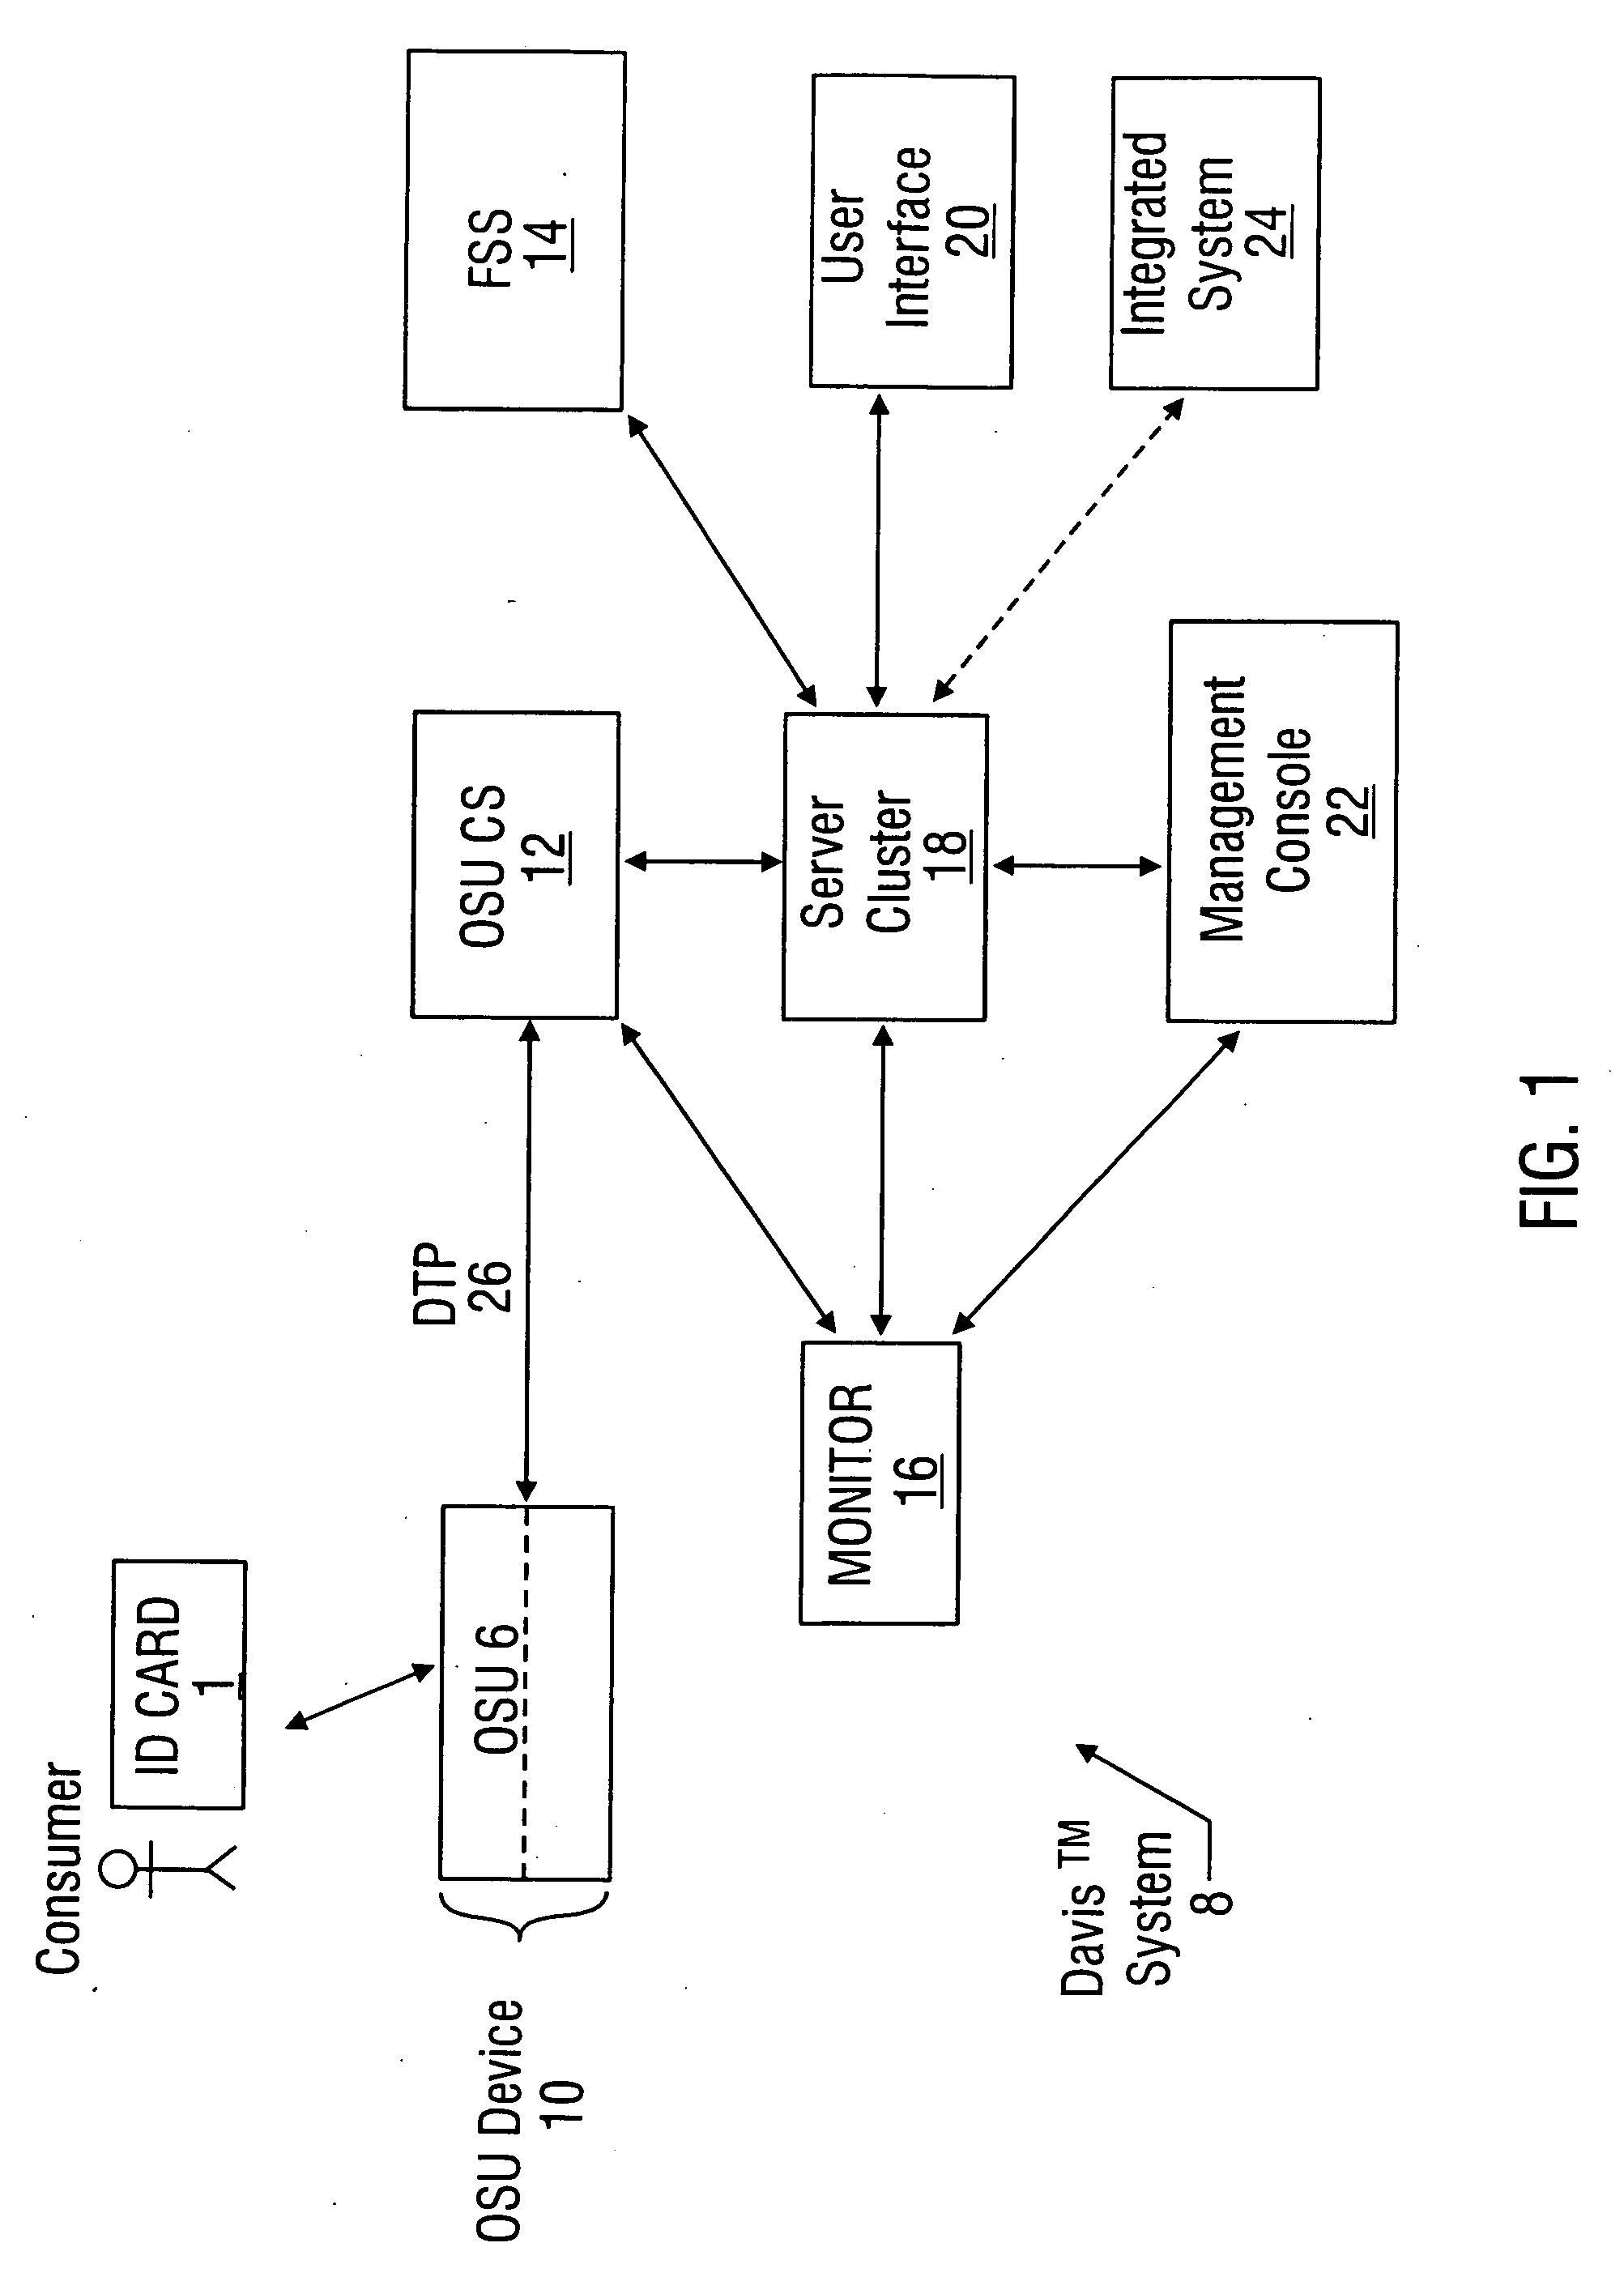 System for vending products and services using an identification card and associated methods